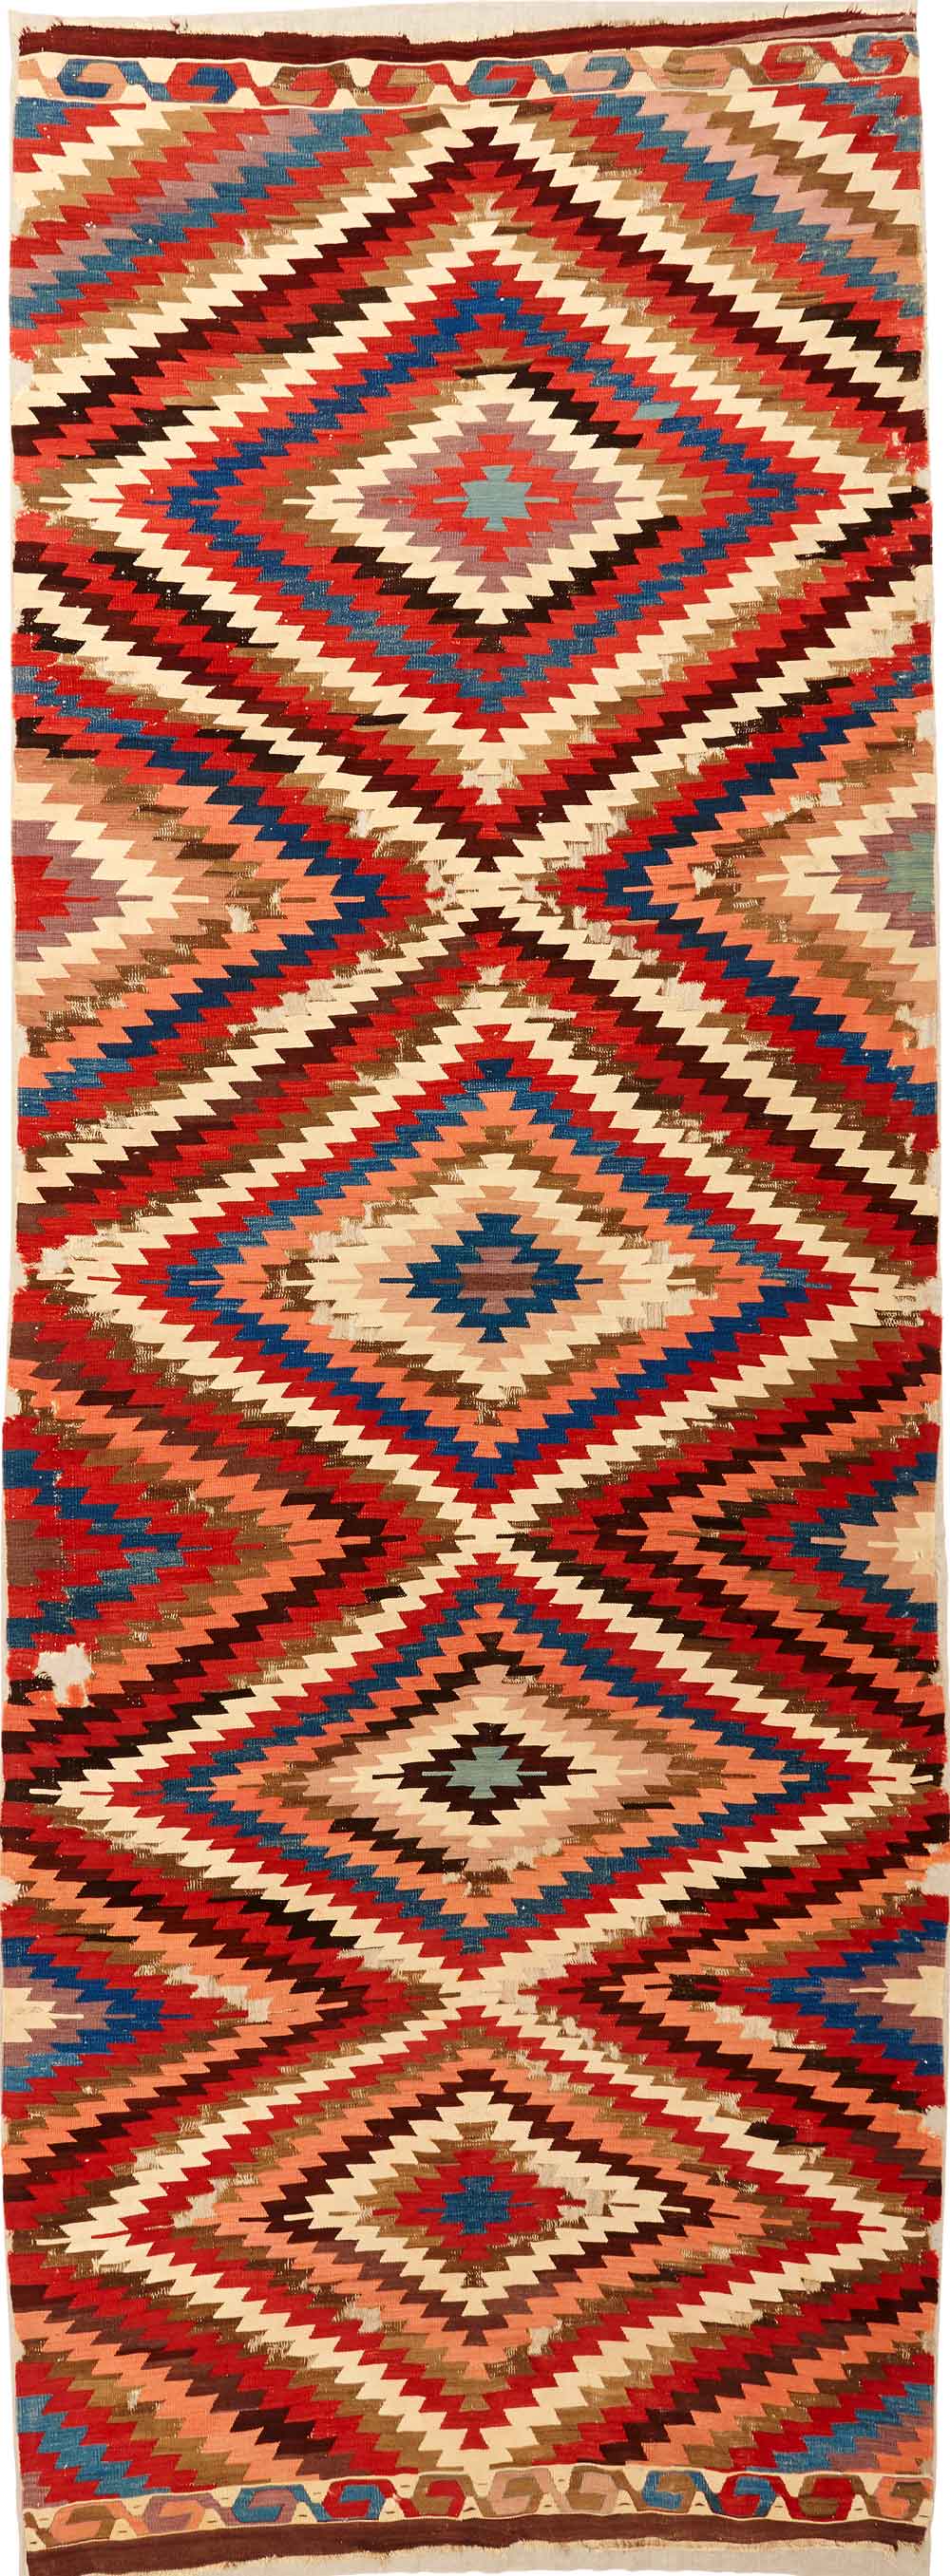 East-Anatolian kilim, 19th century, 154 x 400 cm. Despite its similarities with kilims from Western Anatolia and the Konya region, the  weaving structure and the colours of this piece link it with Eastern Anatolia. 100 Kilims, Neiriz Collection on view at Halle, Germany